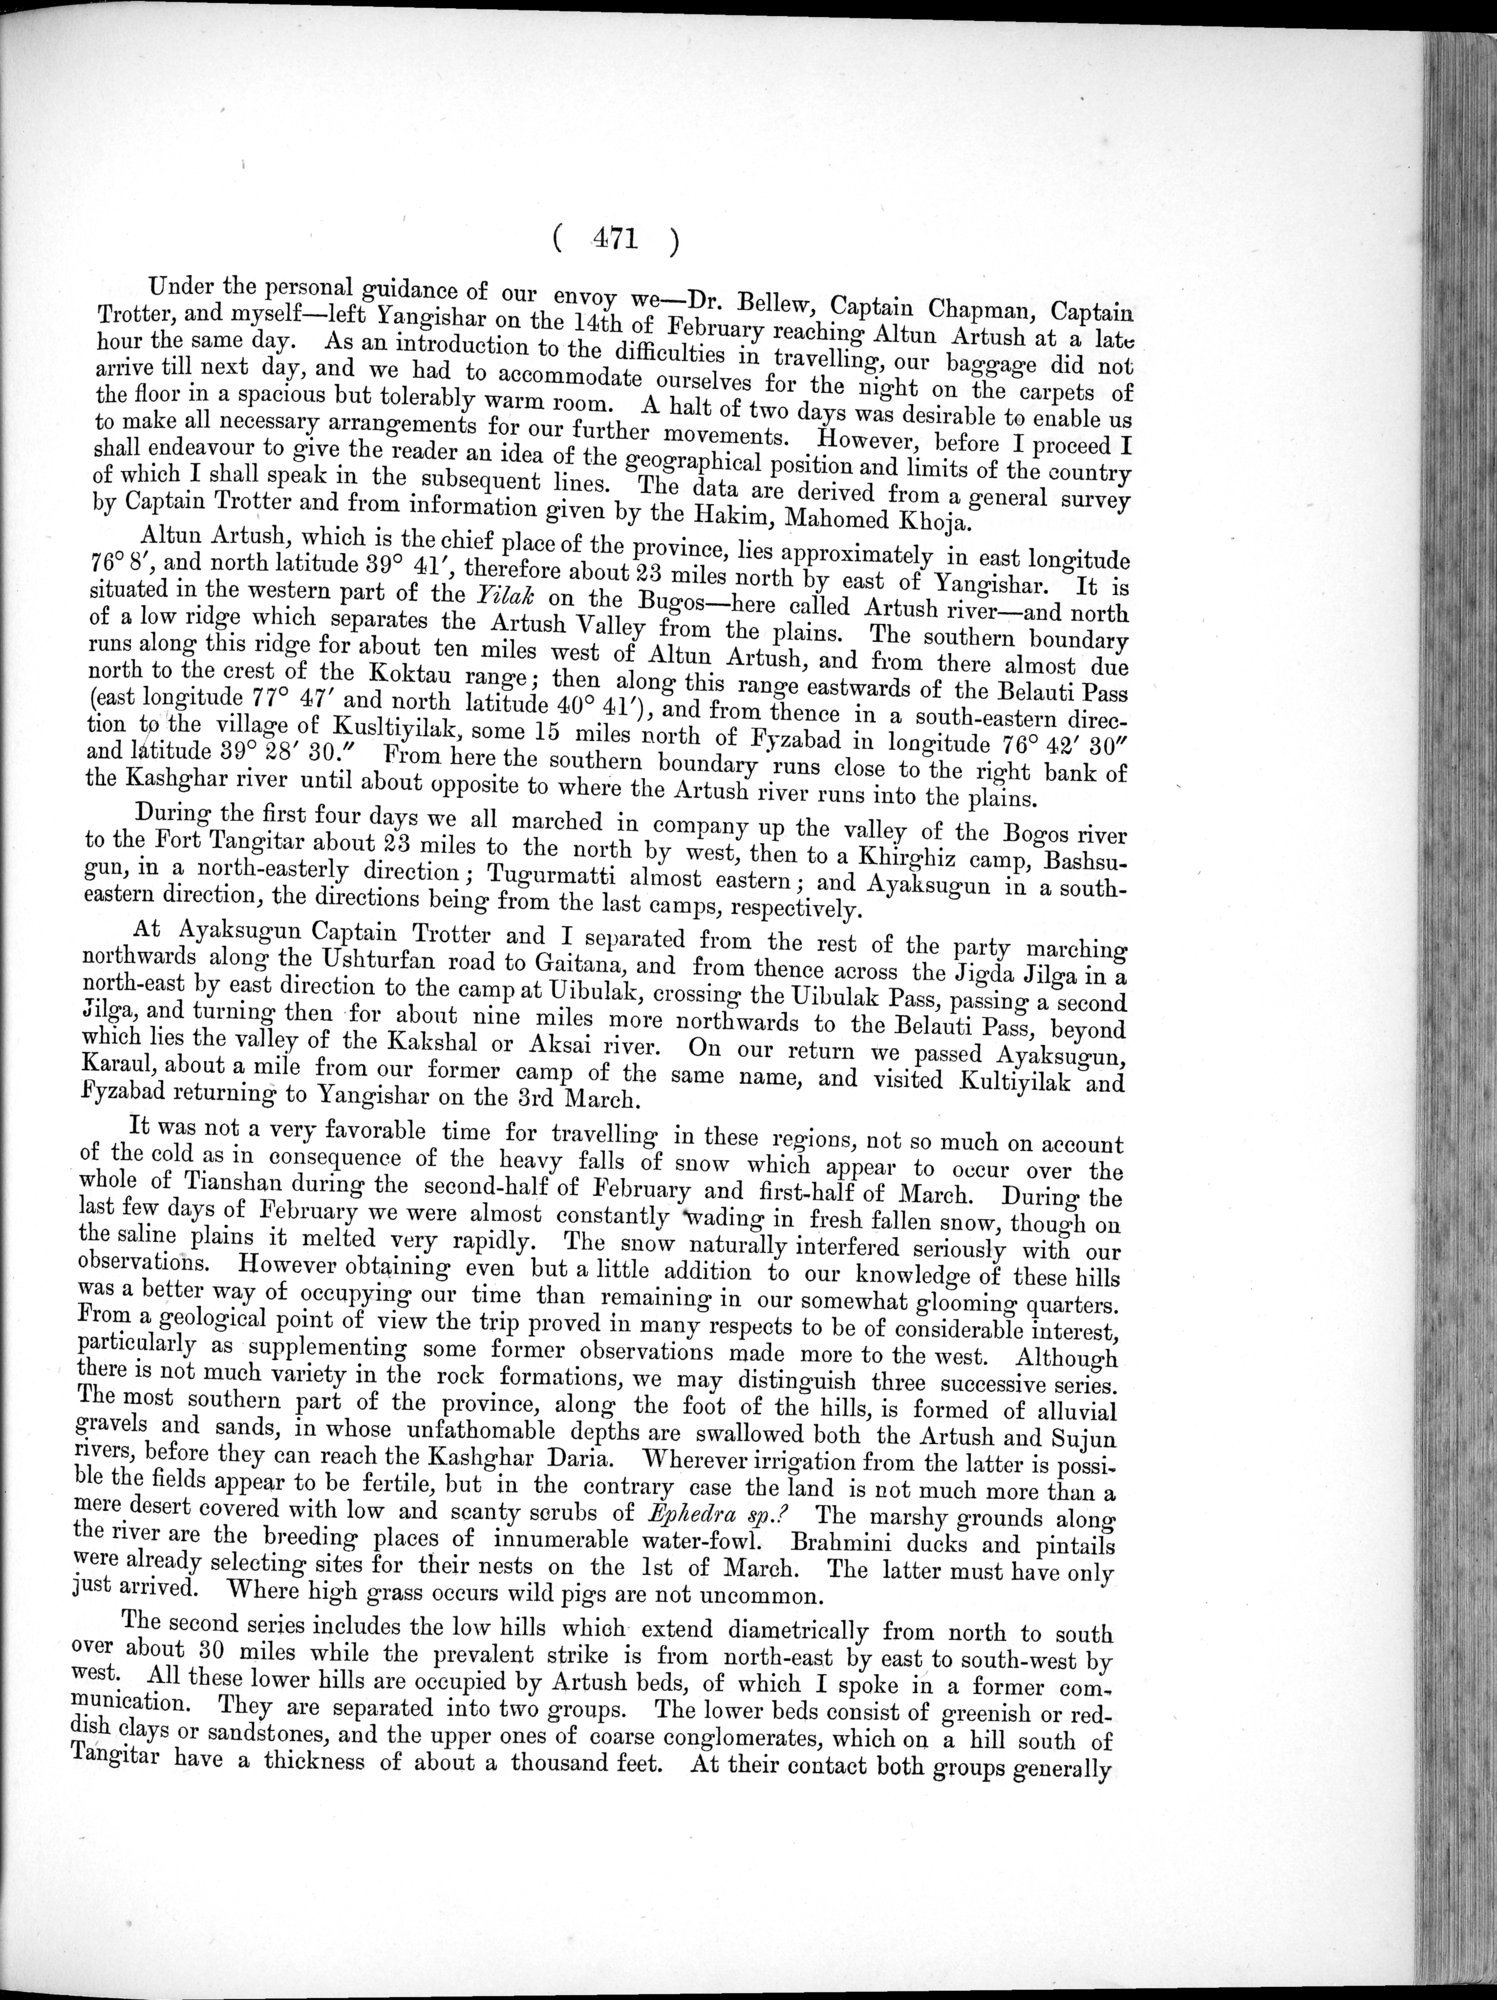 Report of a Mission to Yarkund in 1873 : vol.1 / Page 605 (Grayscale High Resolution Image)